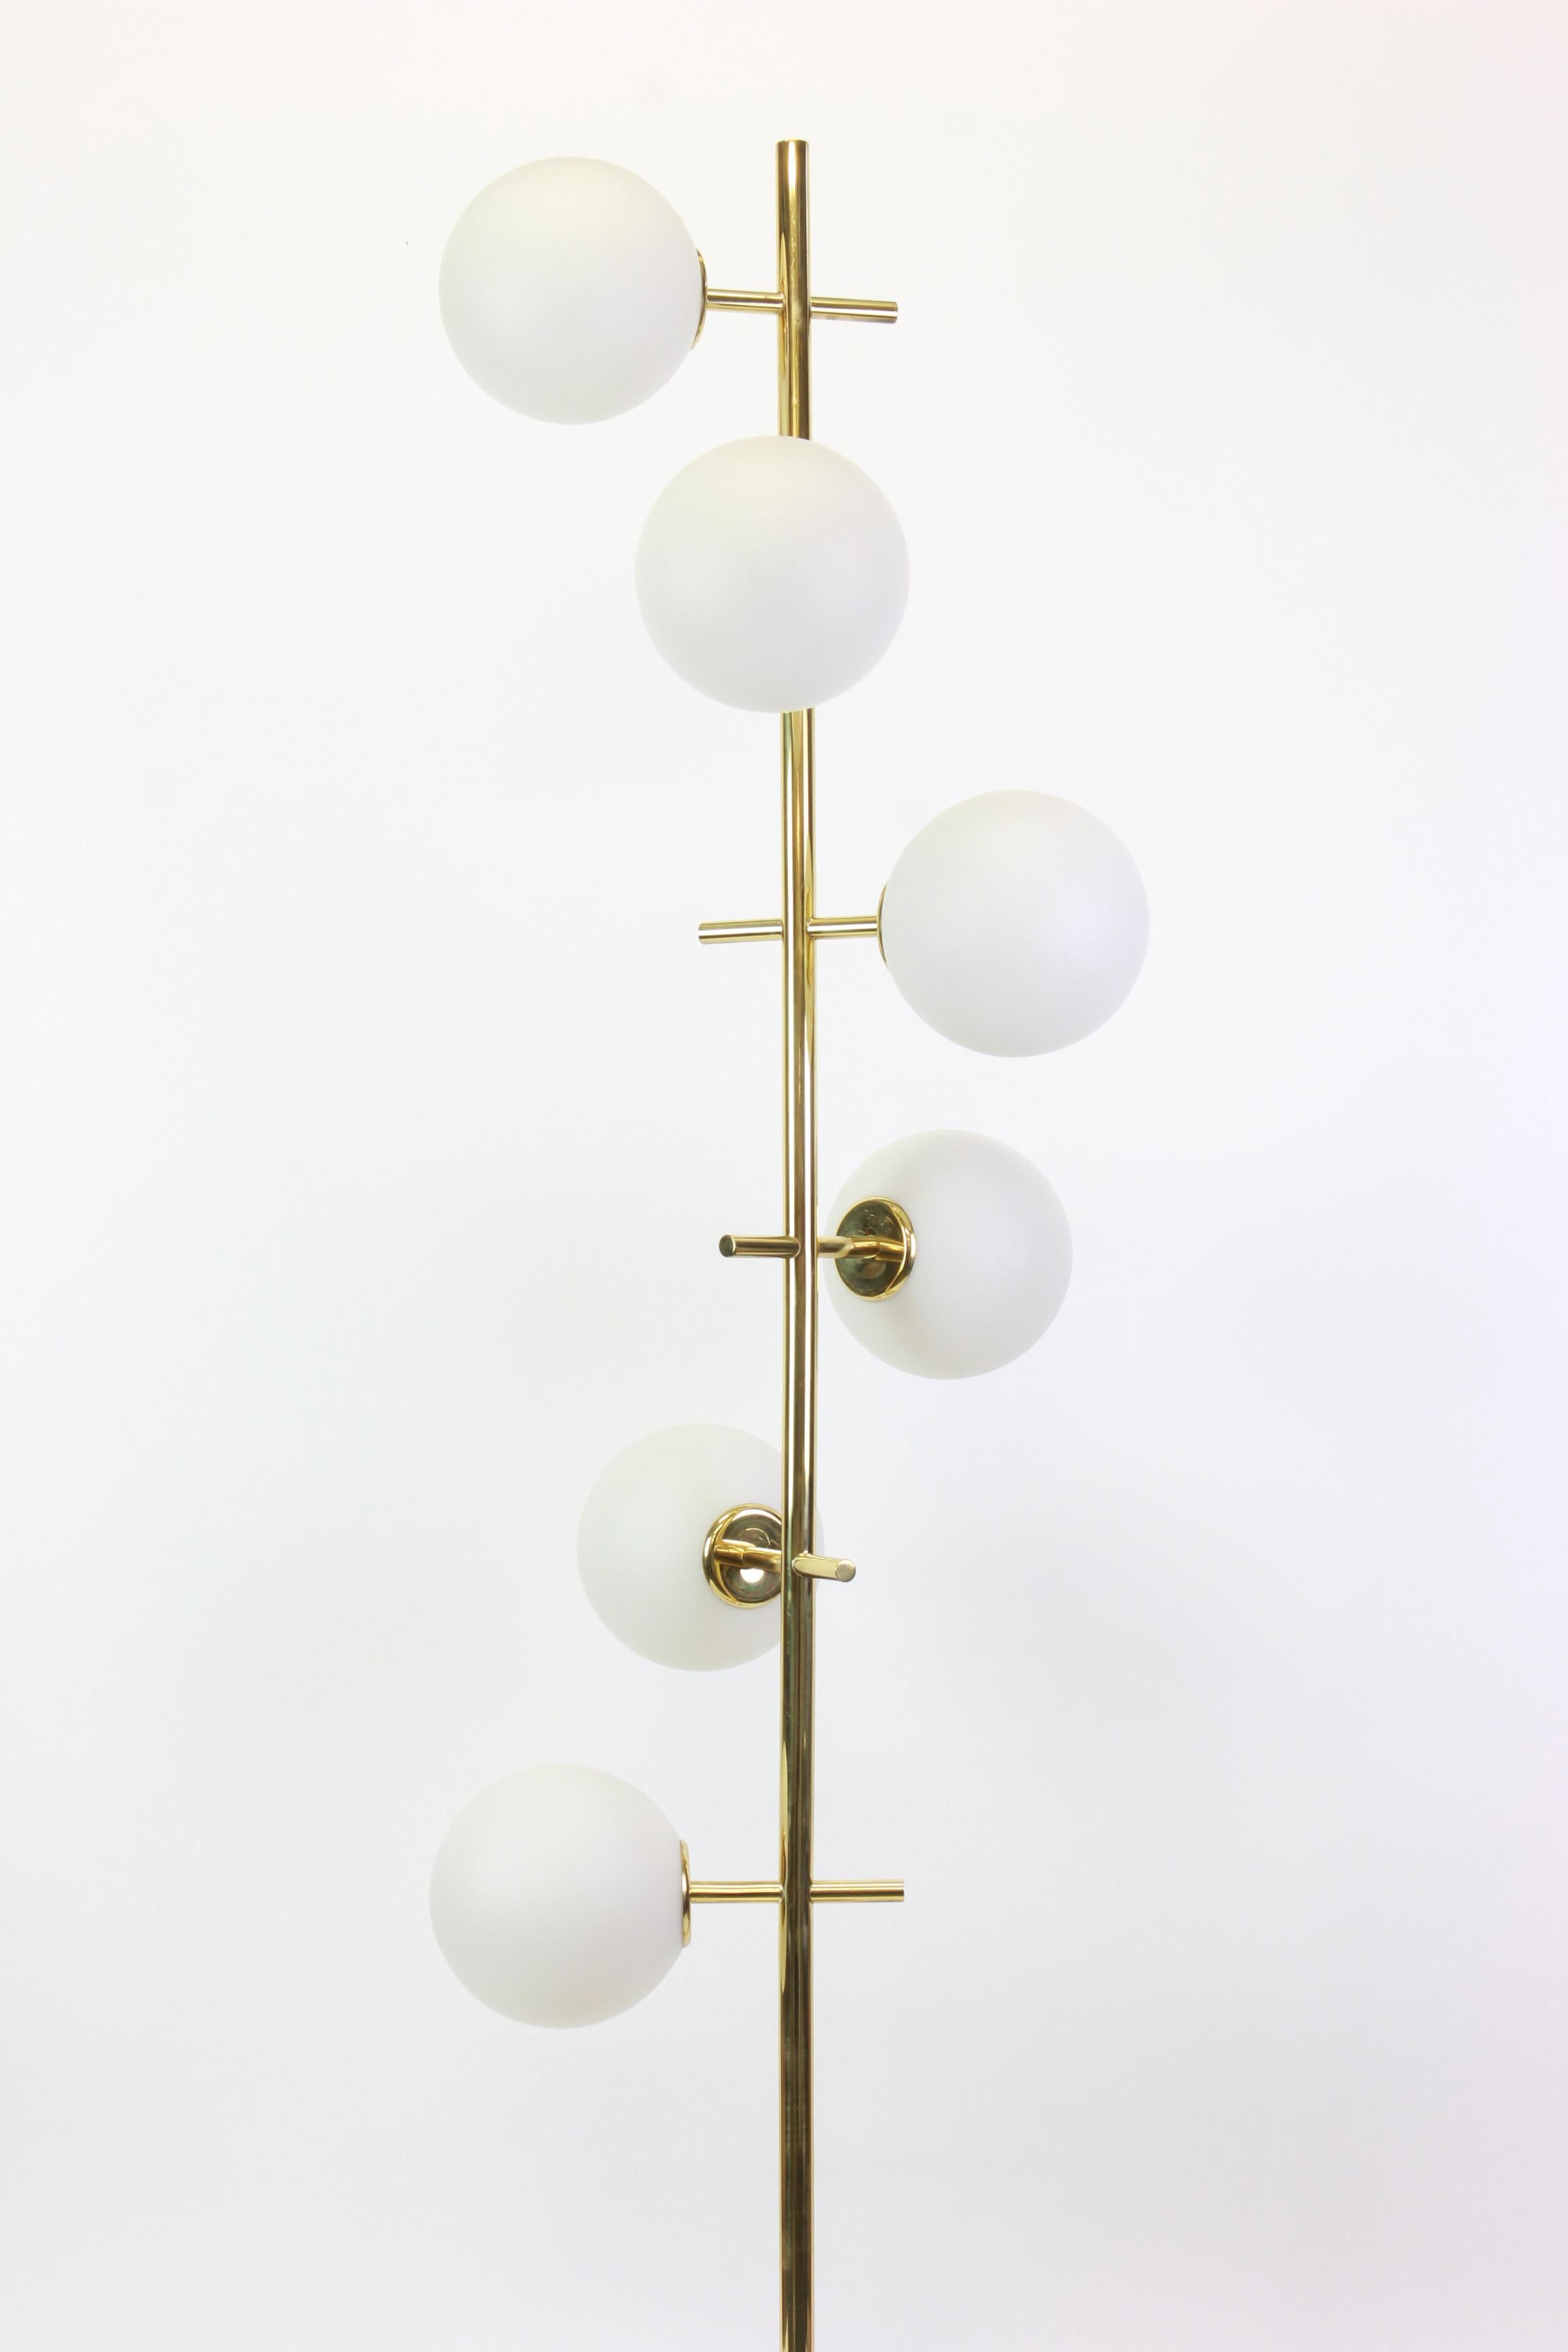 Atomic floor lamp with six-glass globes was designed by the Swiss artist and designer Max Bill for Temde Leuchten. The globes are handblown and fitted with a screwing device.

High quality and in very good condition with a tiny dent on the brass